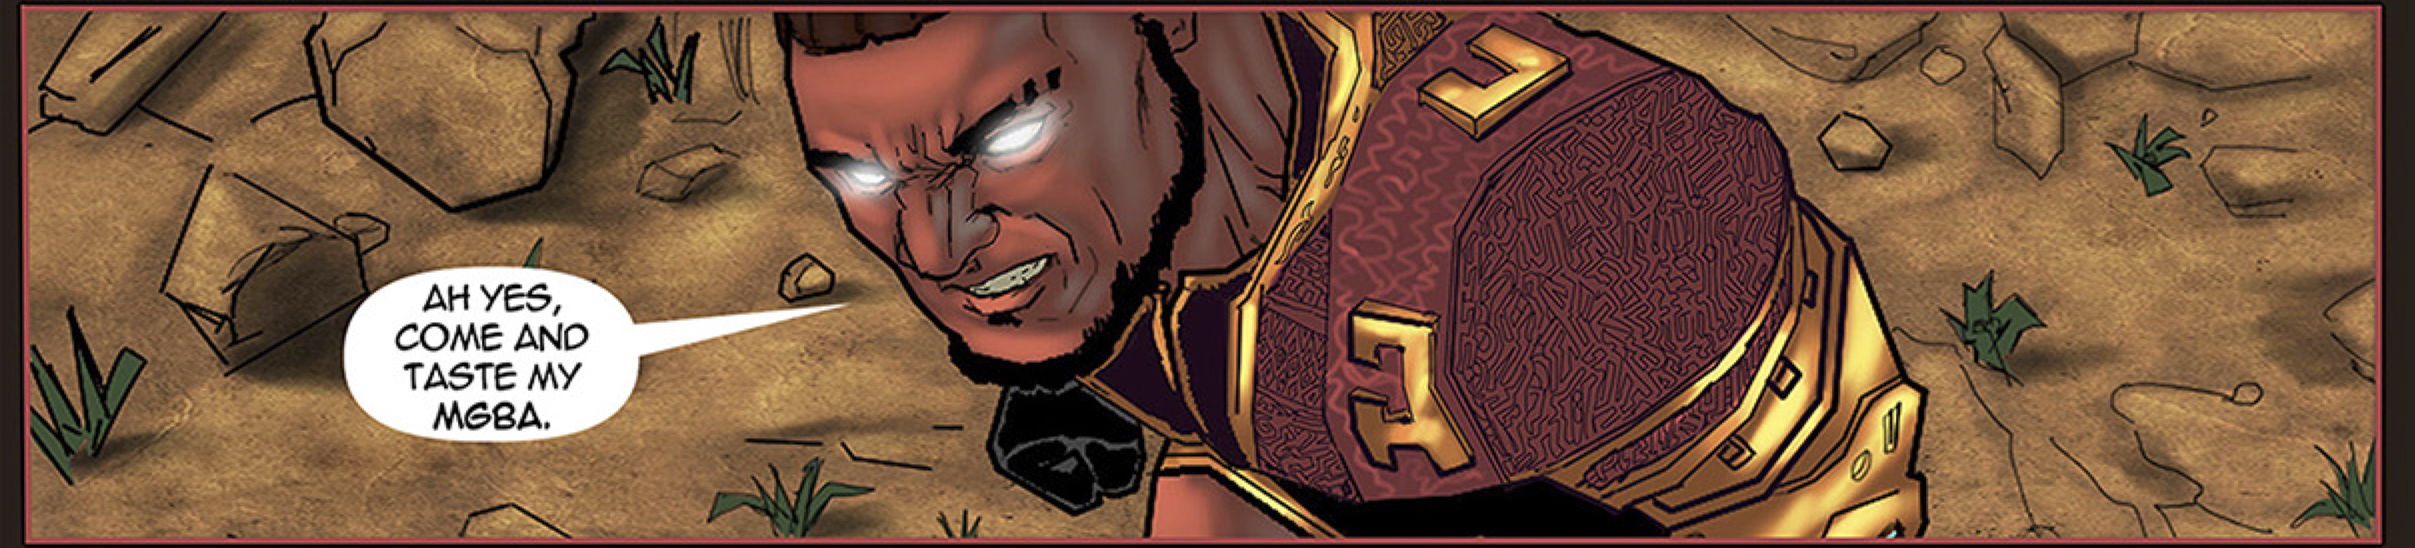 Alaric asking his attackers to come and taste his fighting style in the African comic Scion: Immortal